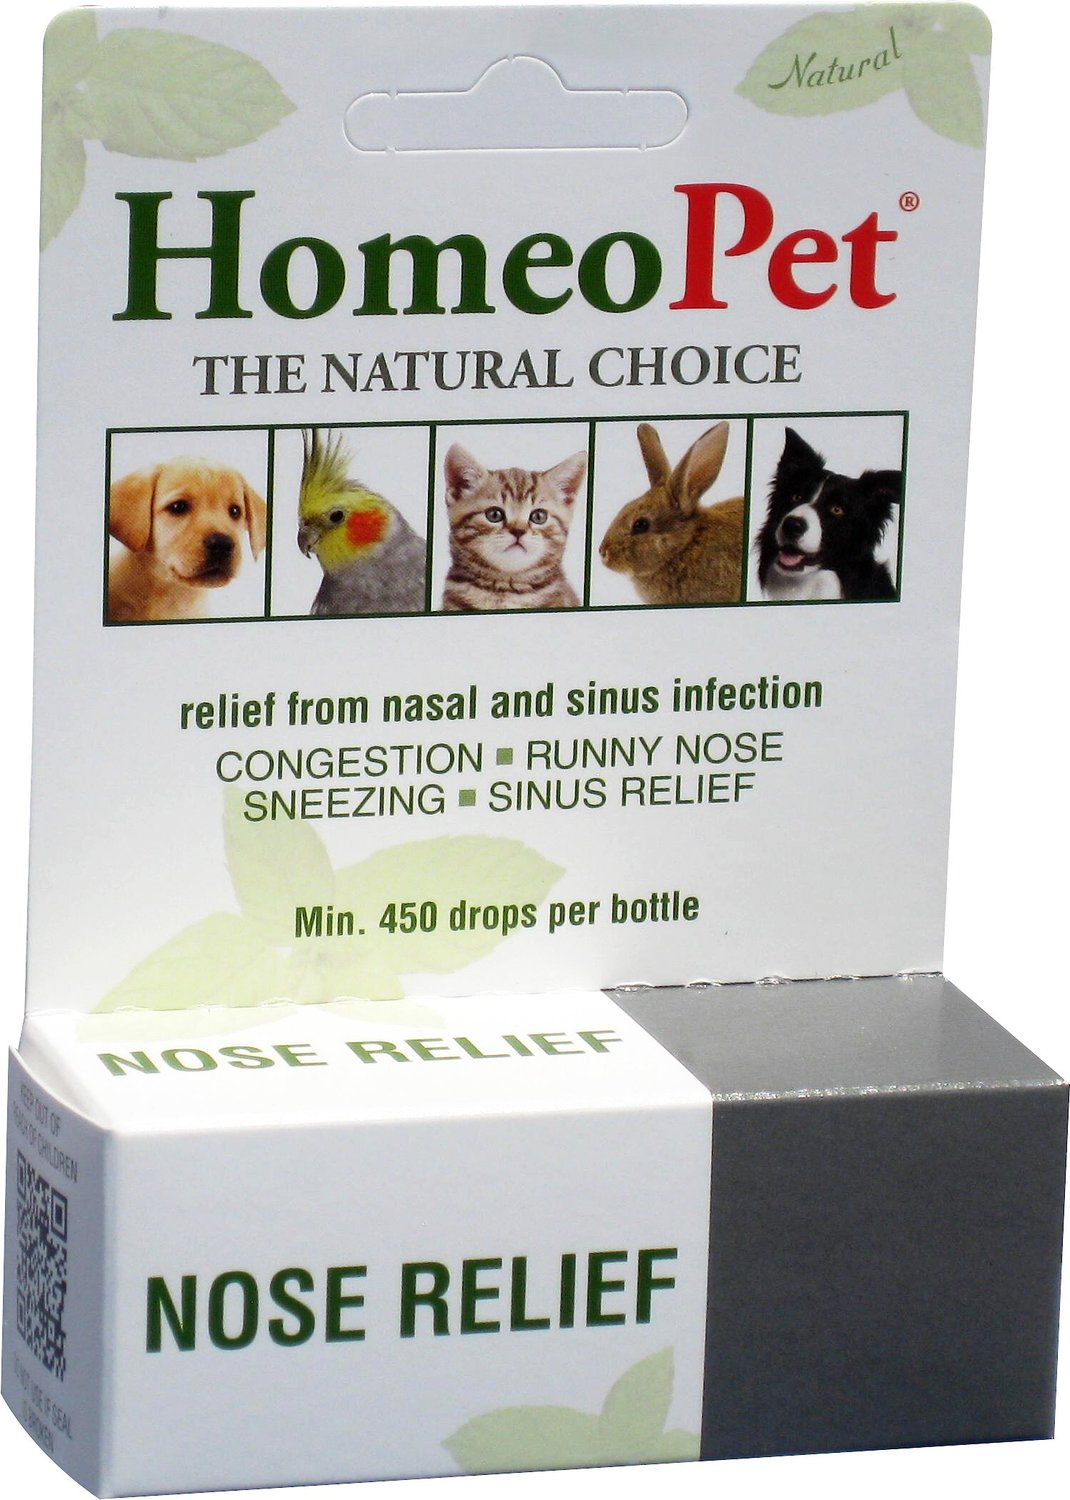 is saline nasal spray safe for dogs